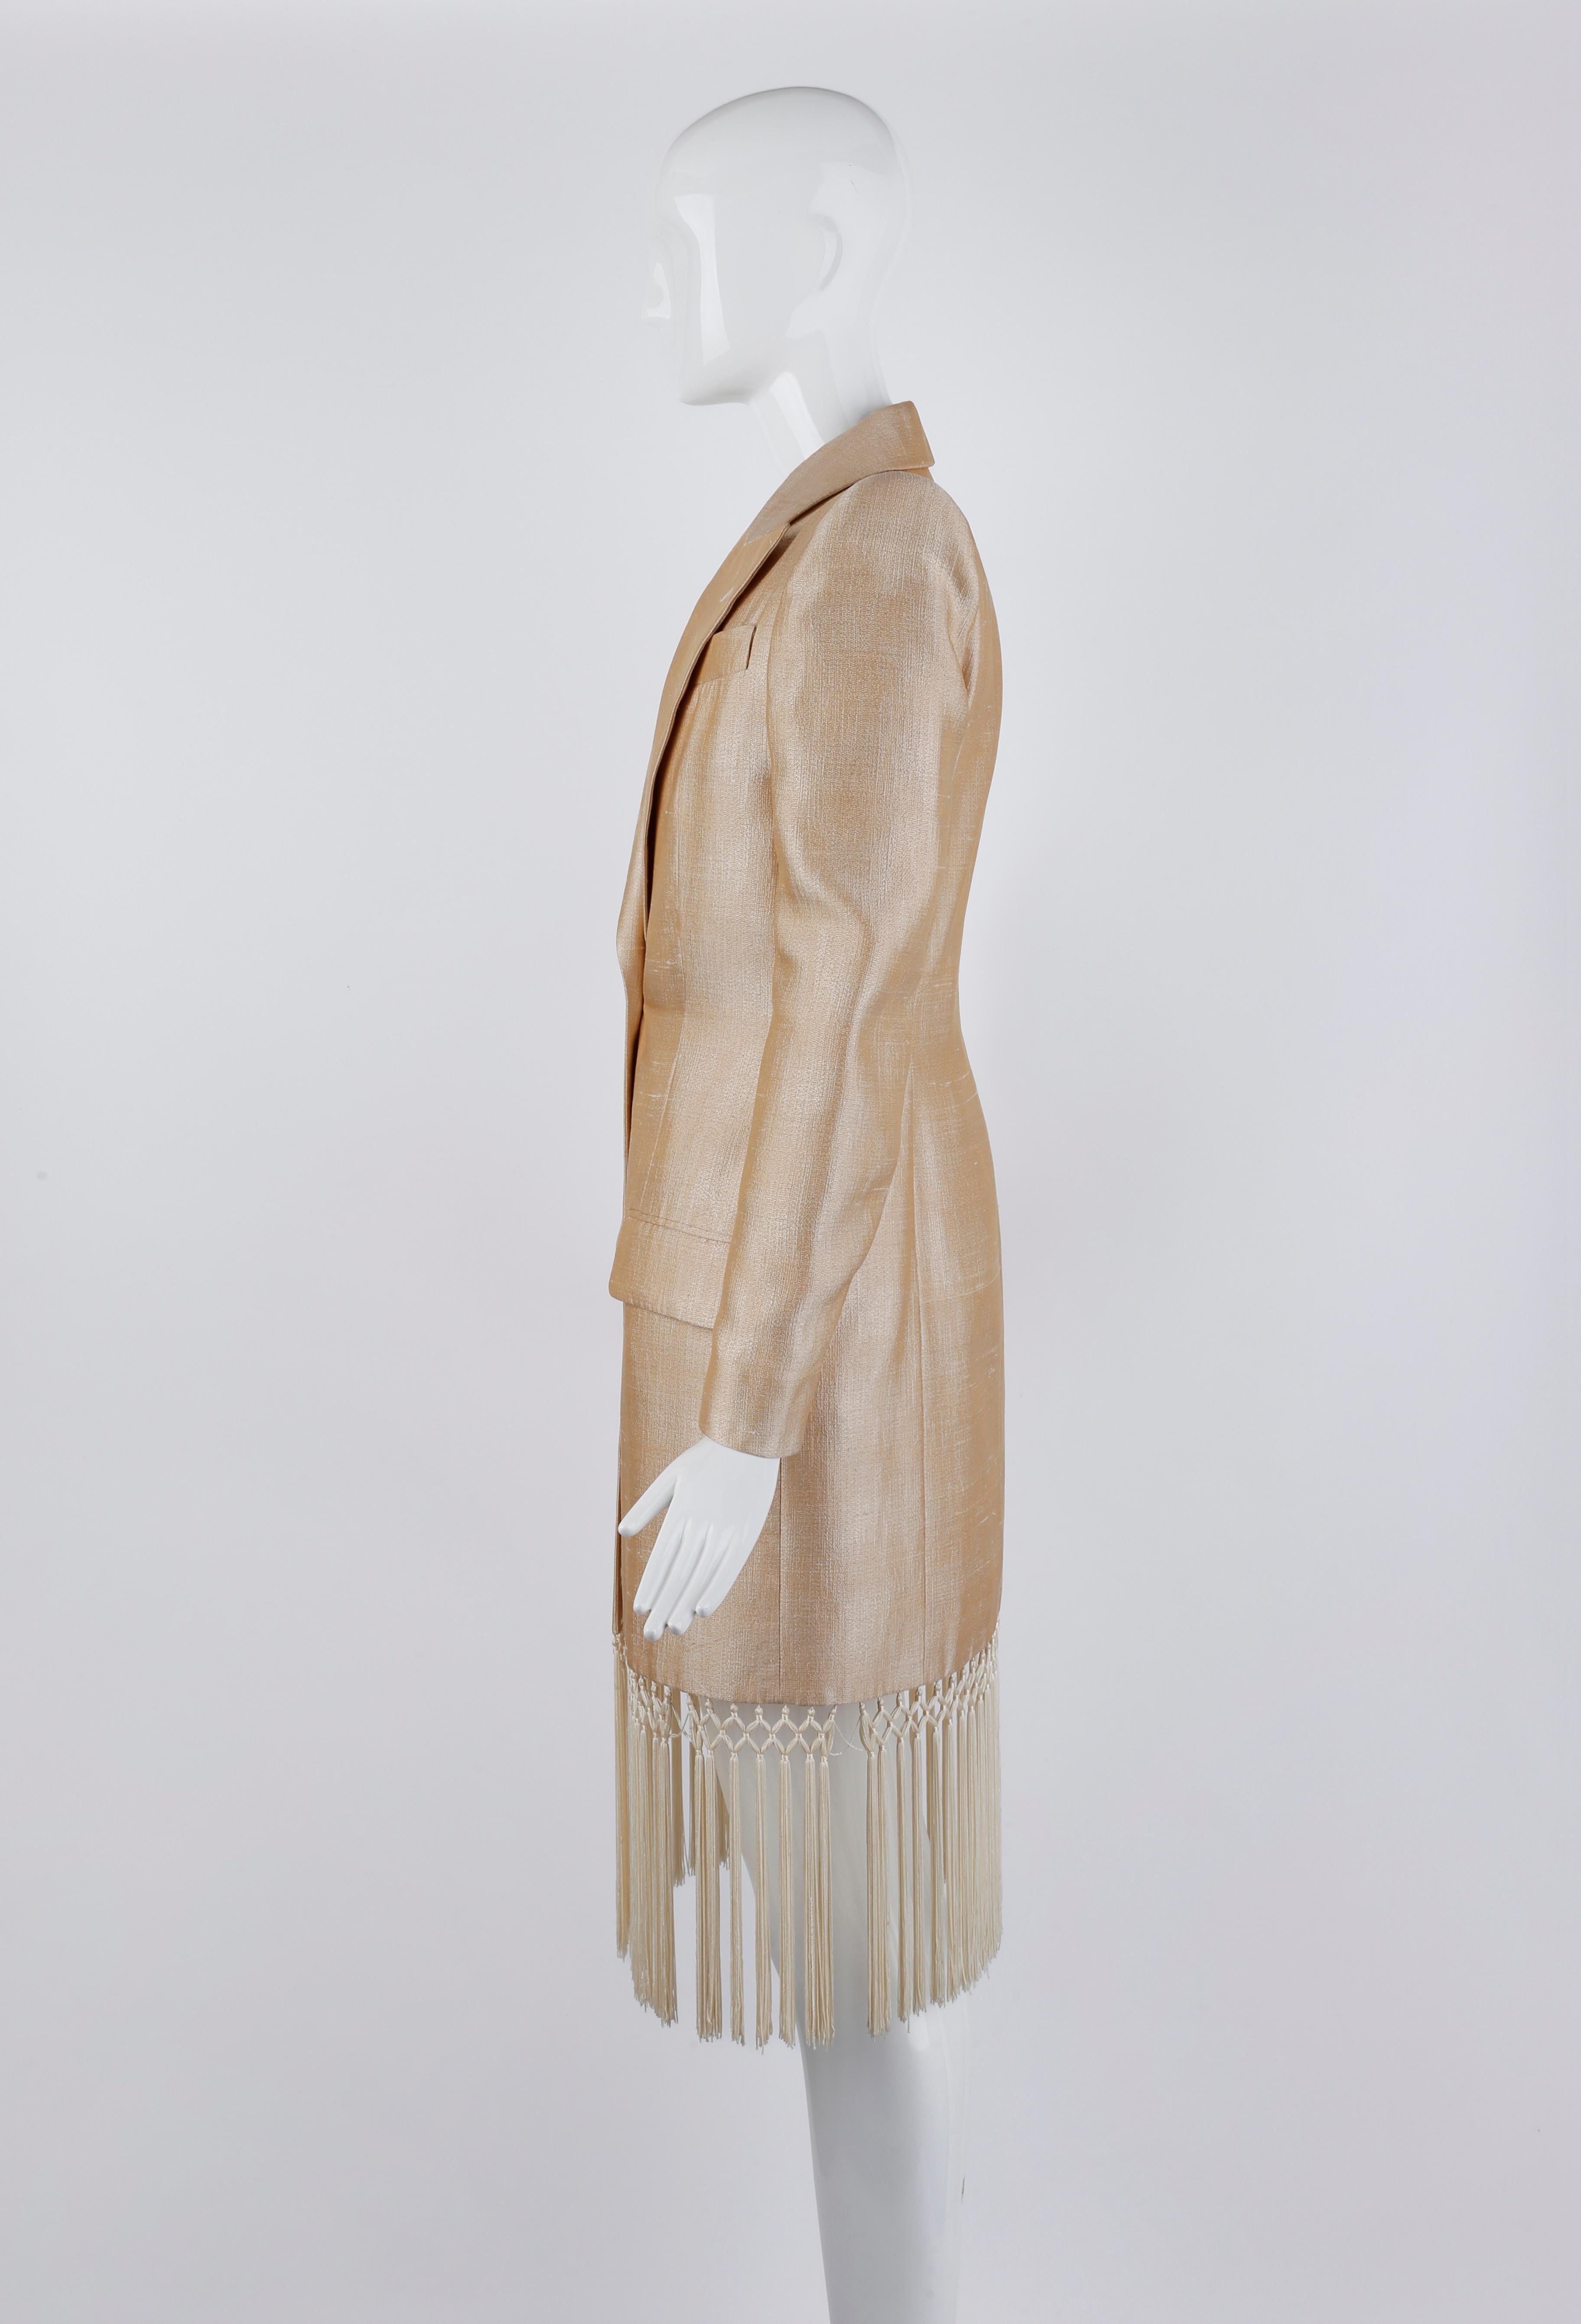 Givenchy Couture Alexander McQueen S/S 1998 Champagne Silk Tassel Dress Coat For Sale 3